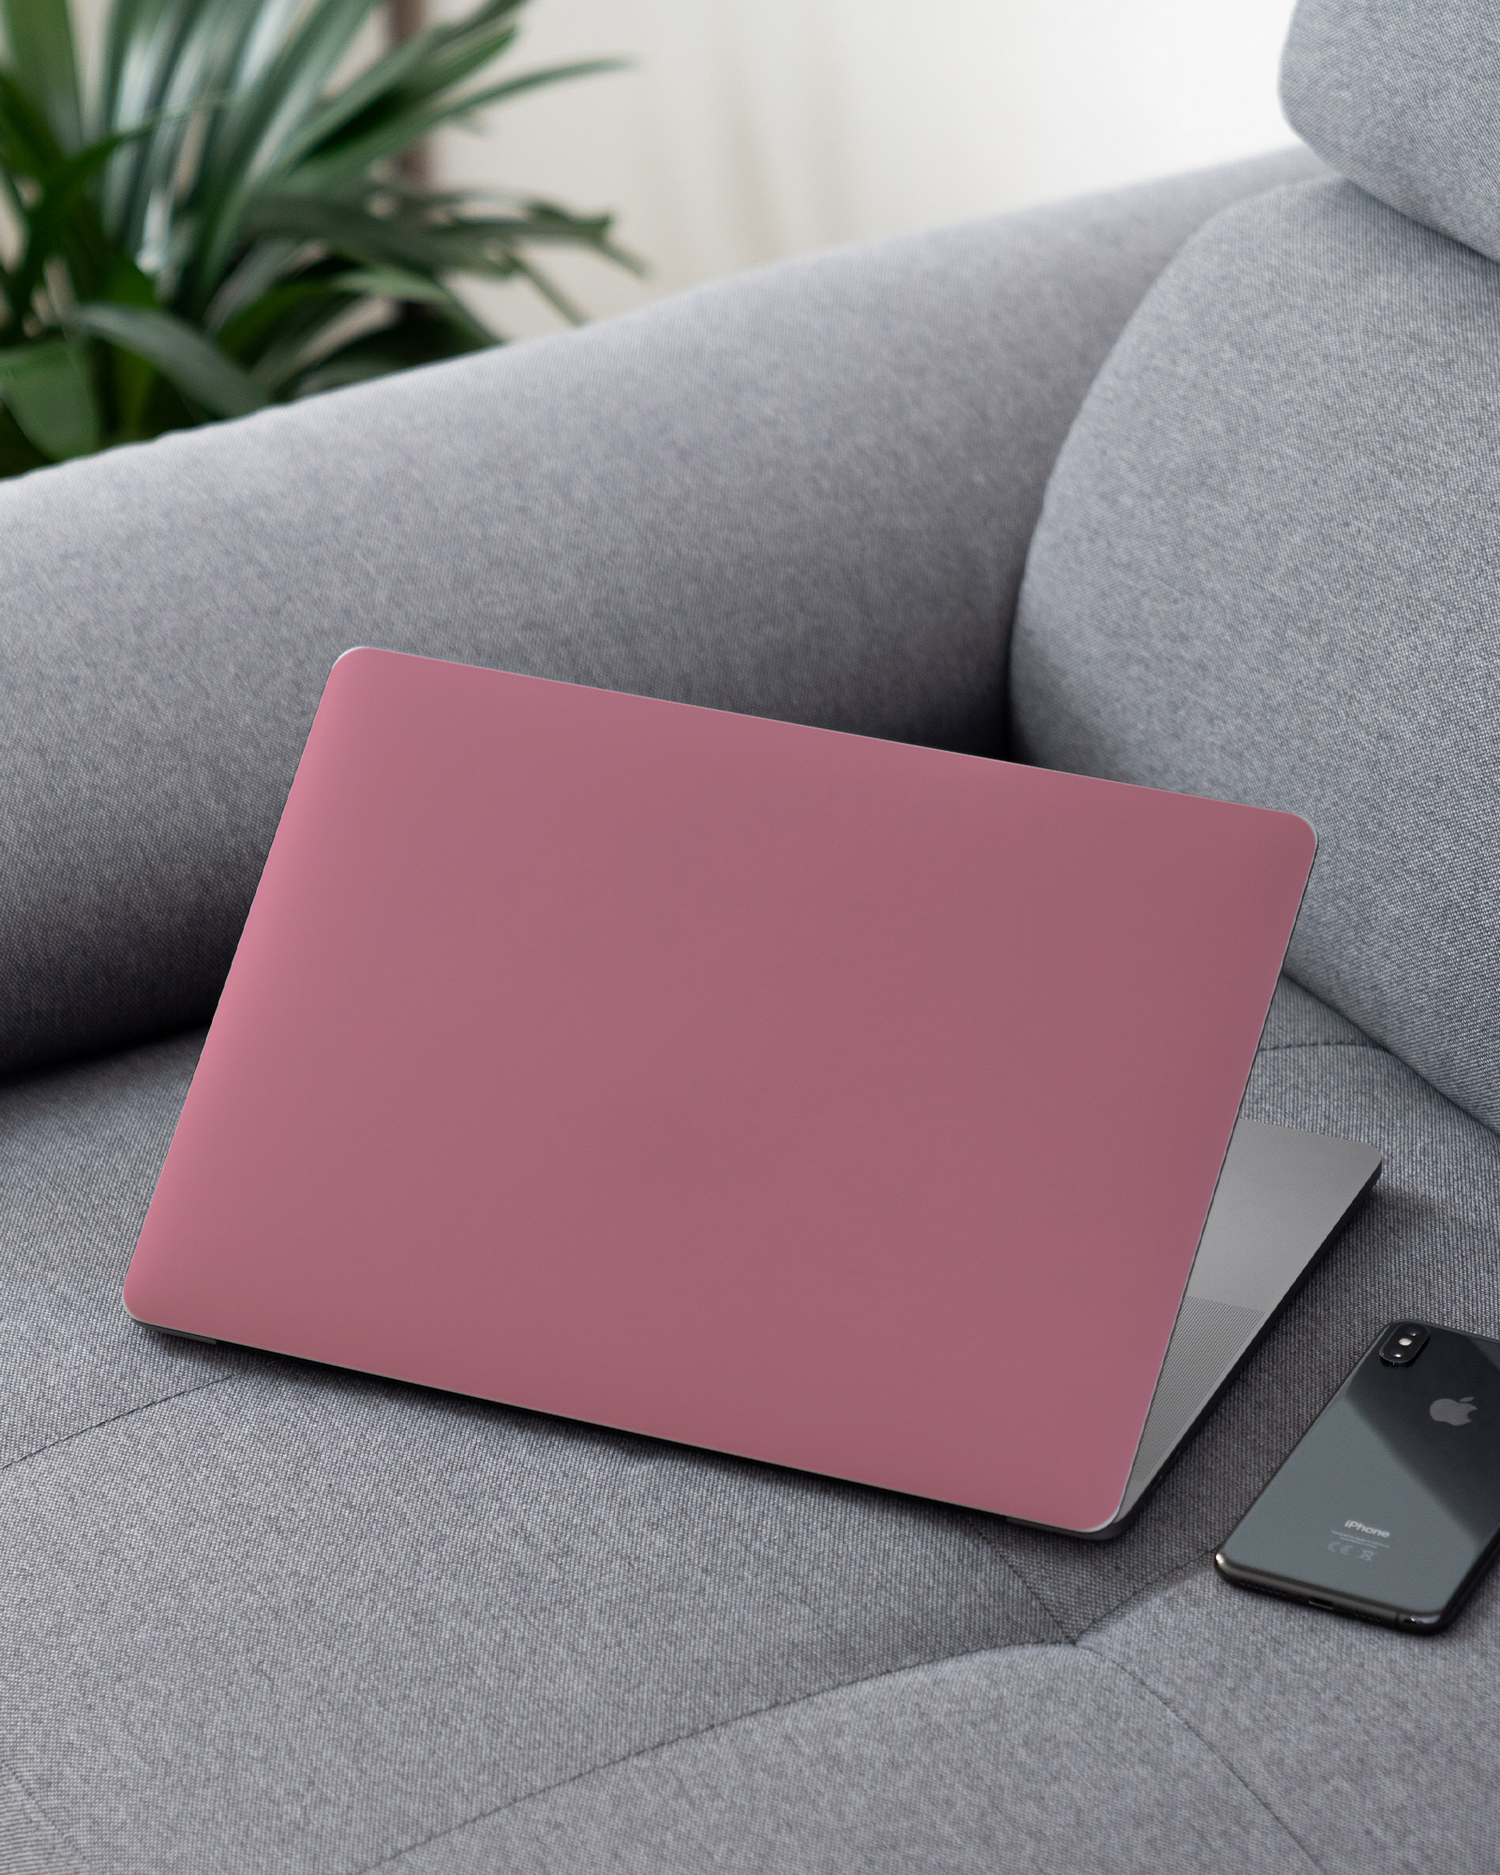 WILD ROSE Laptop Skin for 13 inch Apple MacBooks on a couch